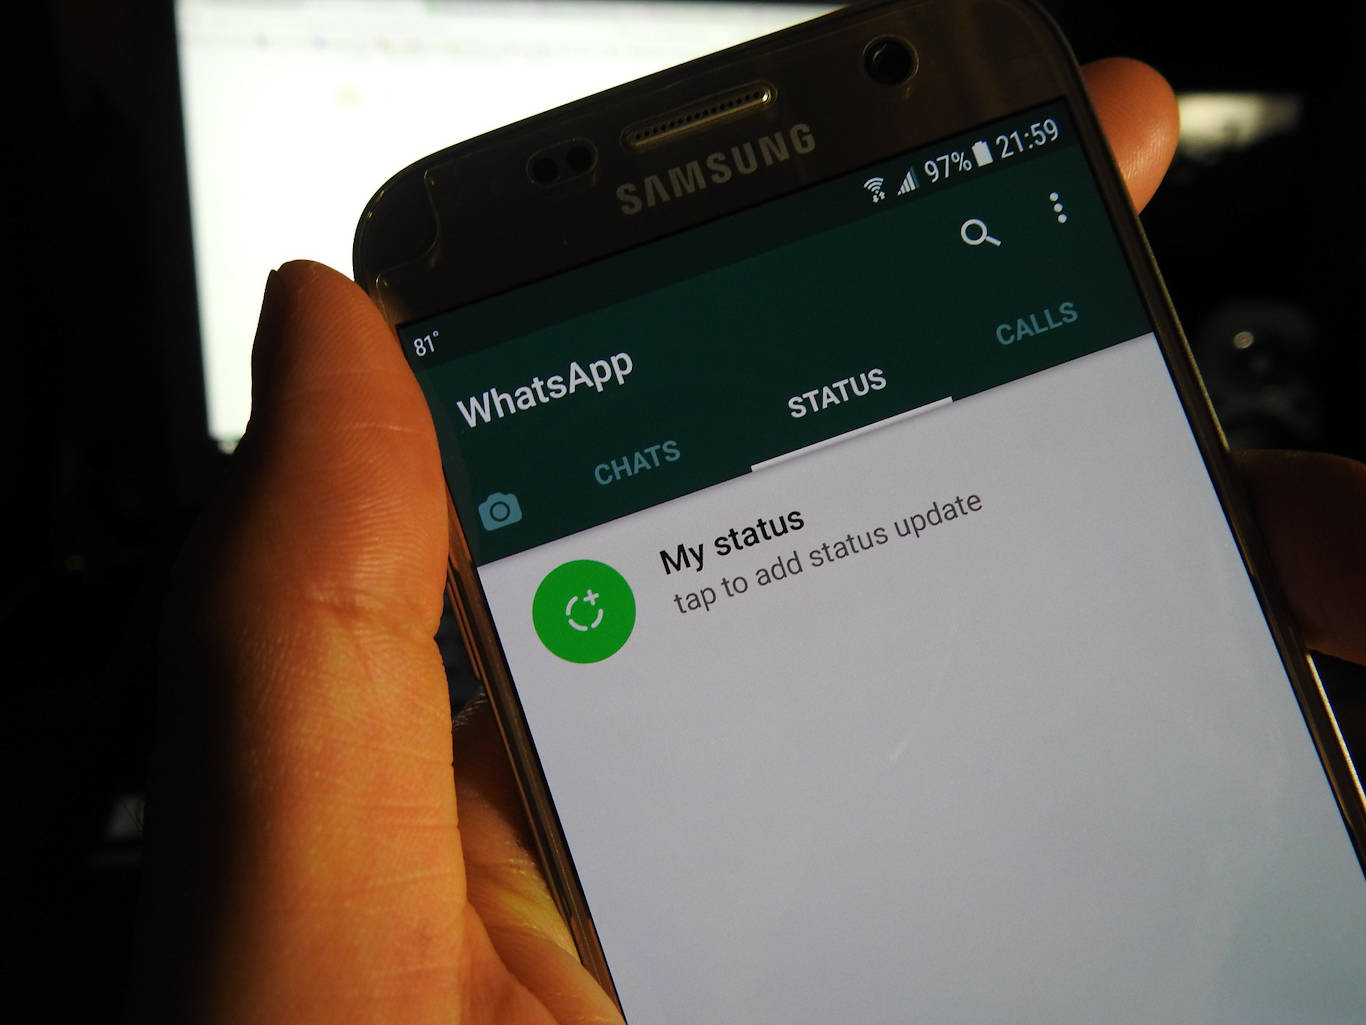 WhatsApp’s new privacy policy doesn’t give you a choice – and could limit your options in the future as well